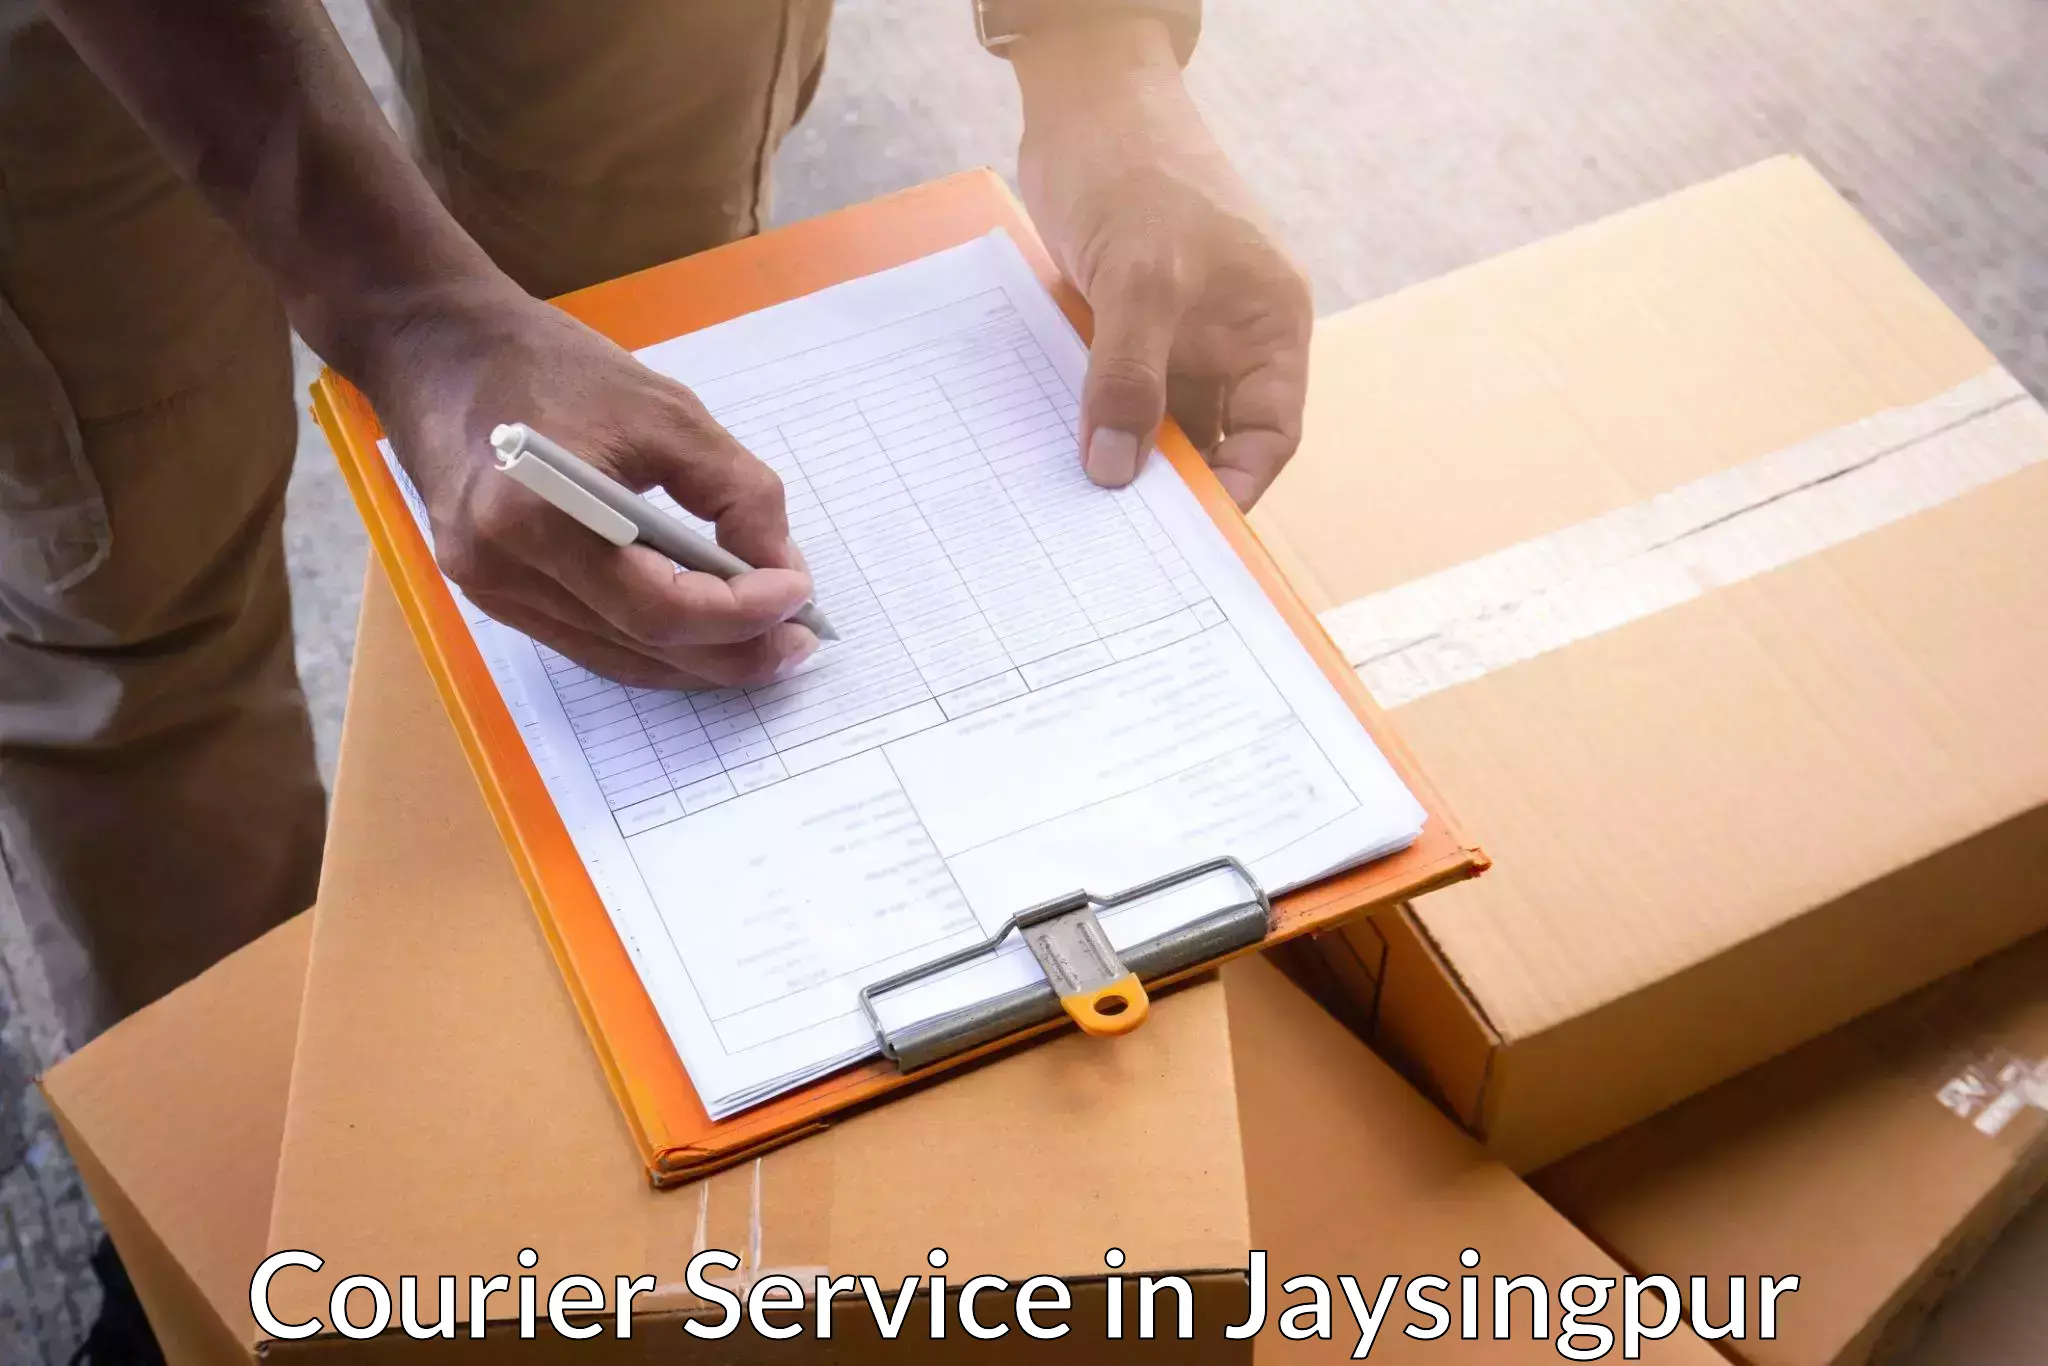 Remote area delivery in Jaysingpur